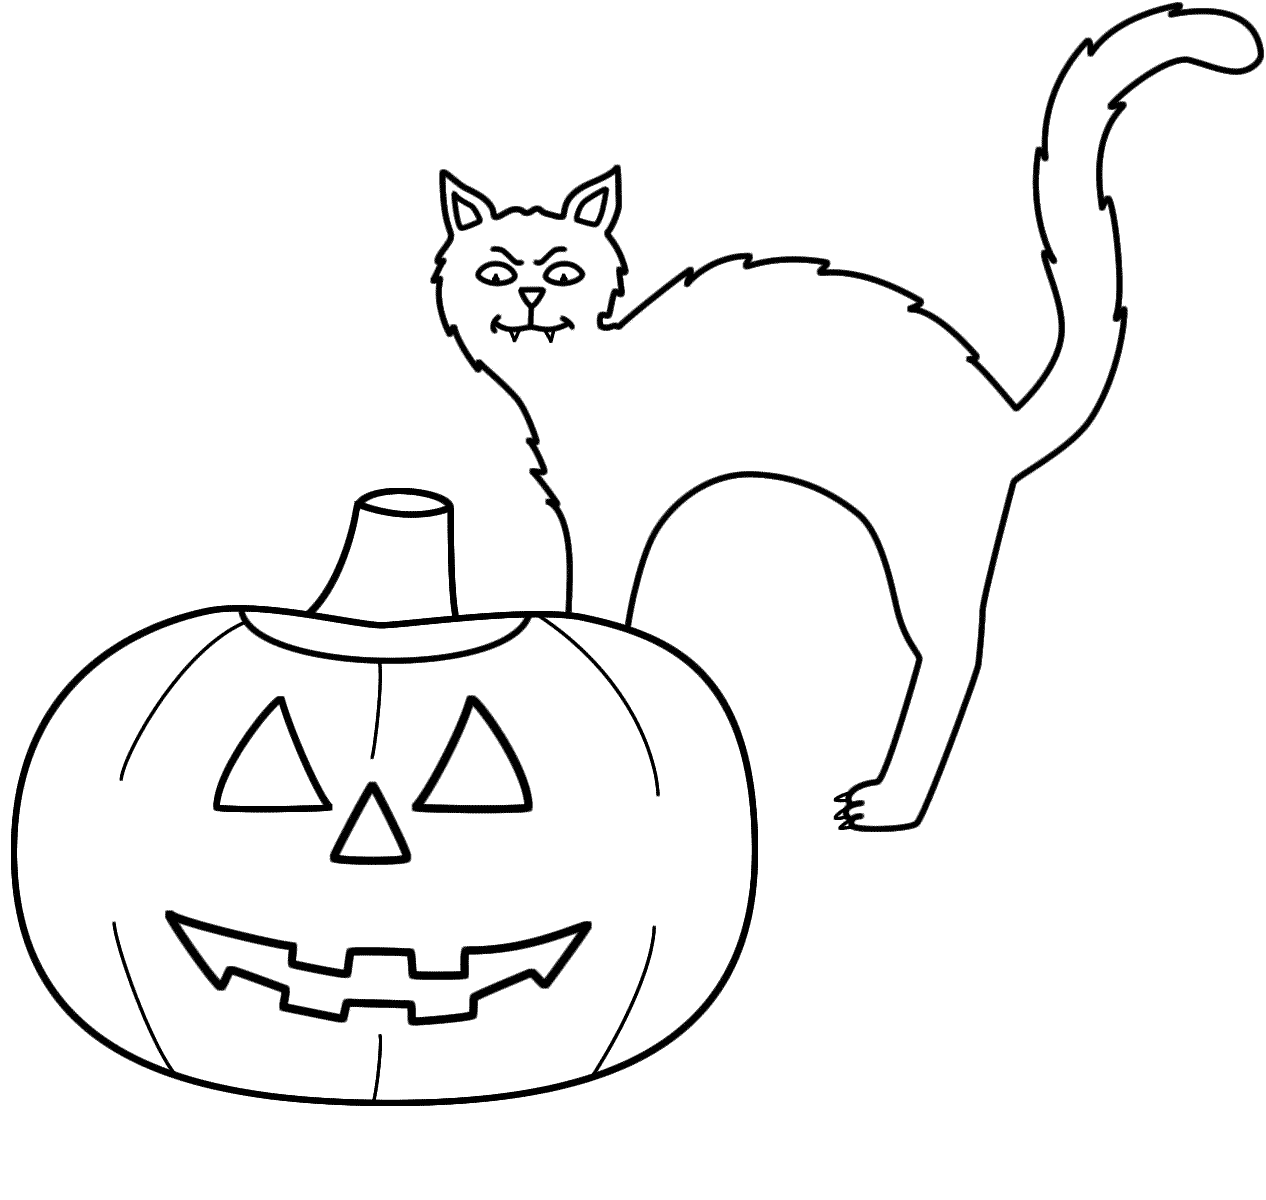 Black Cat And Pumpkin Coloring Page